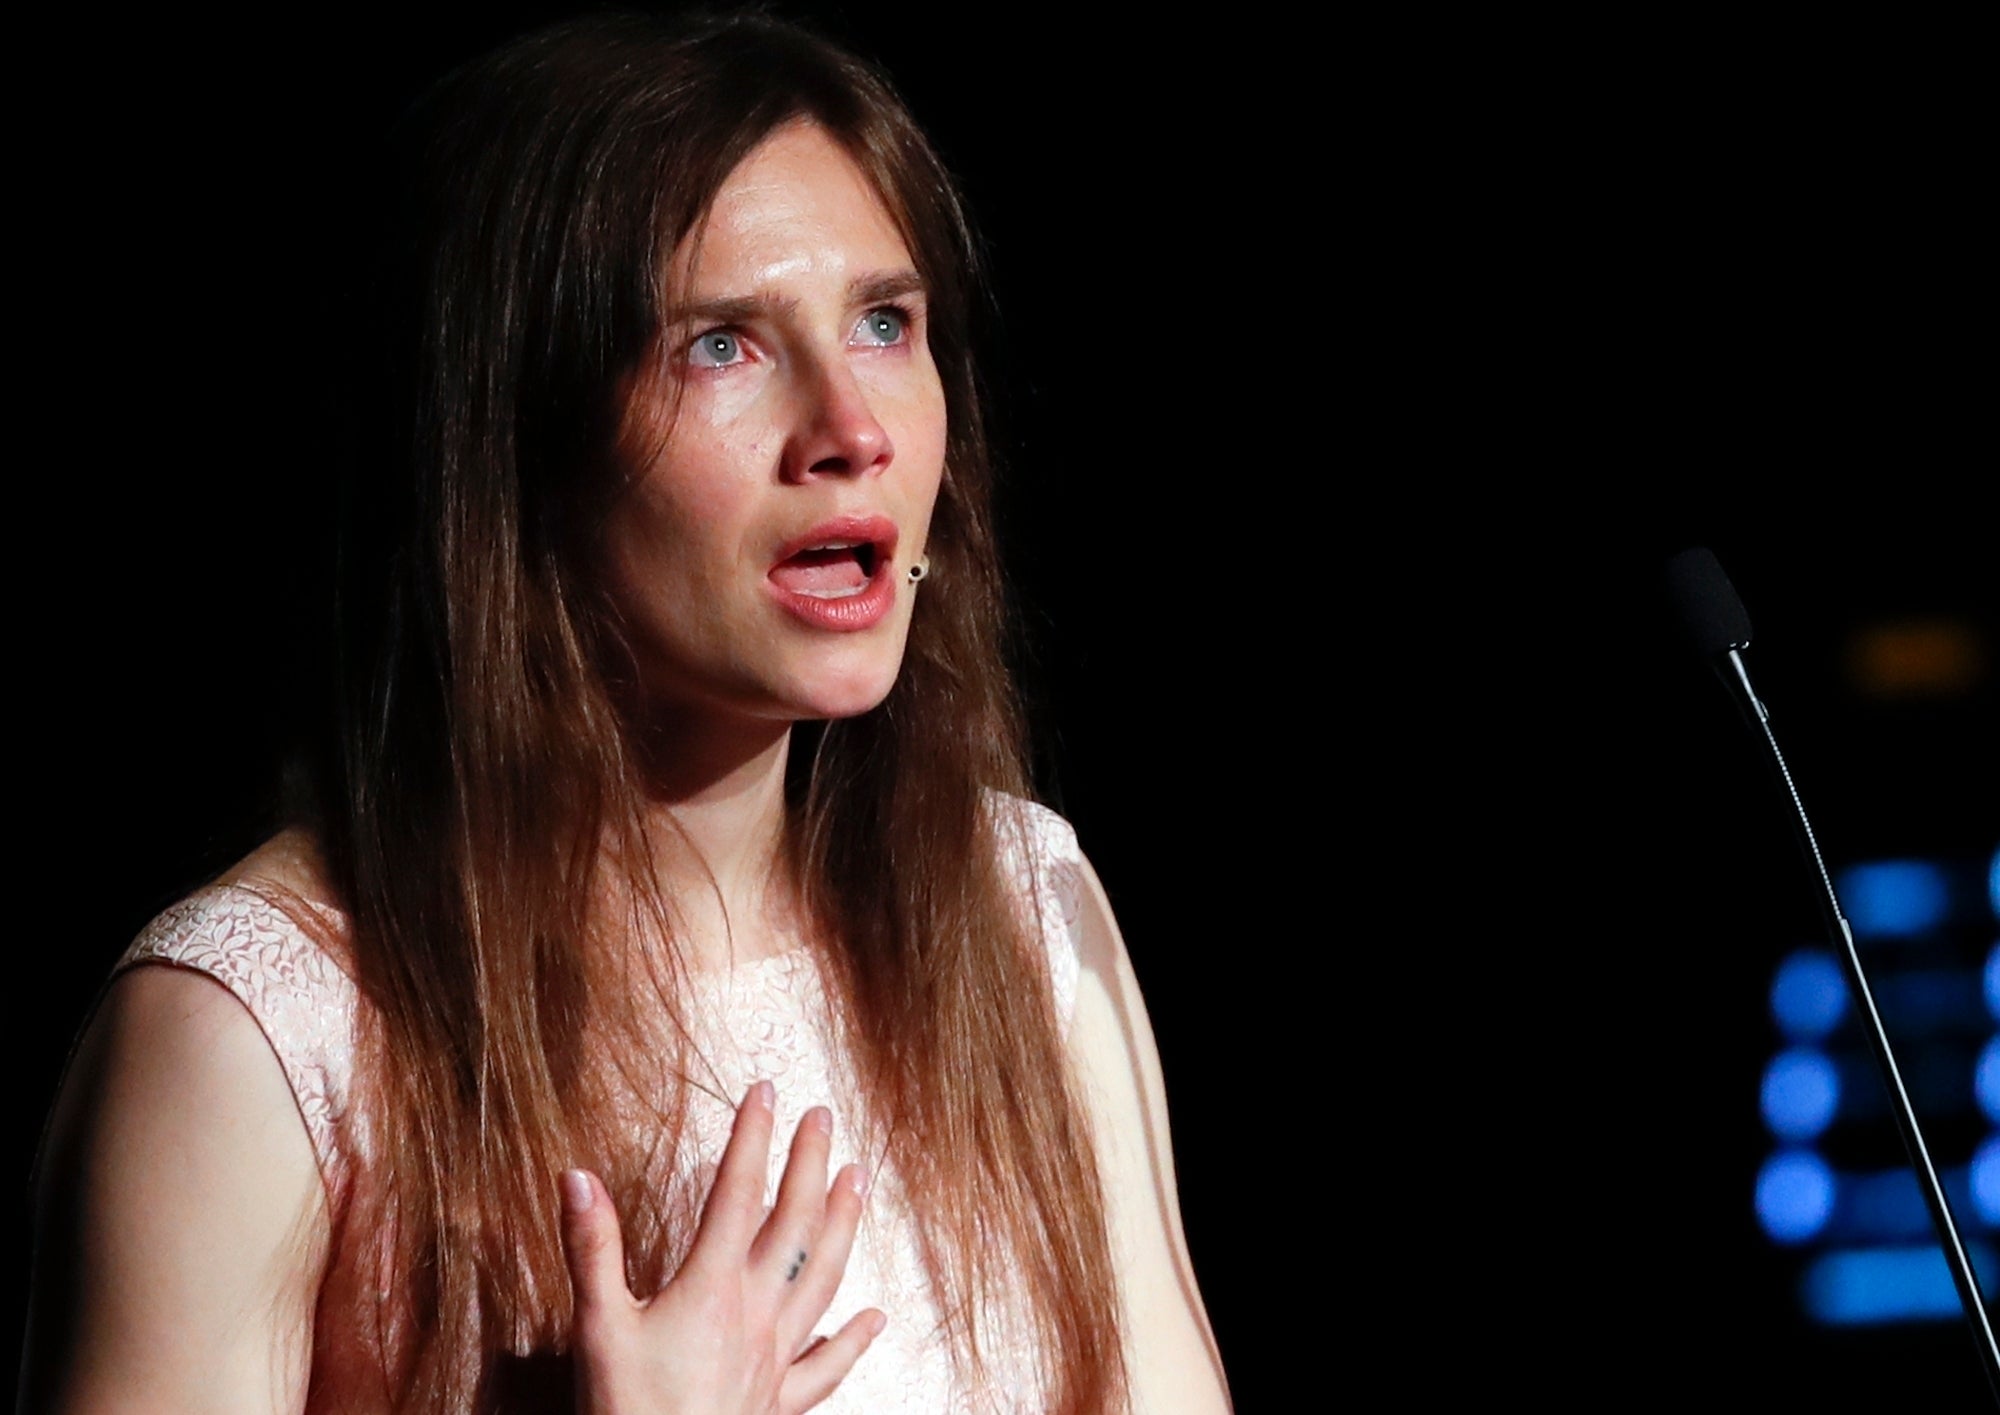 Amanda Knox speaking at an event in 2019